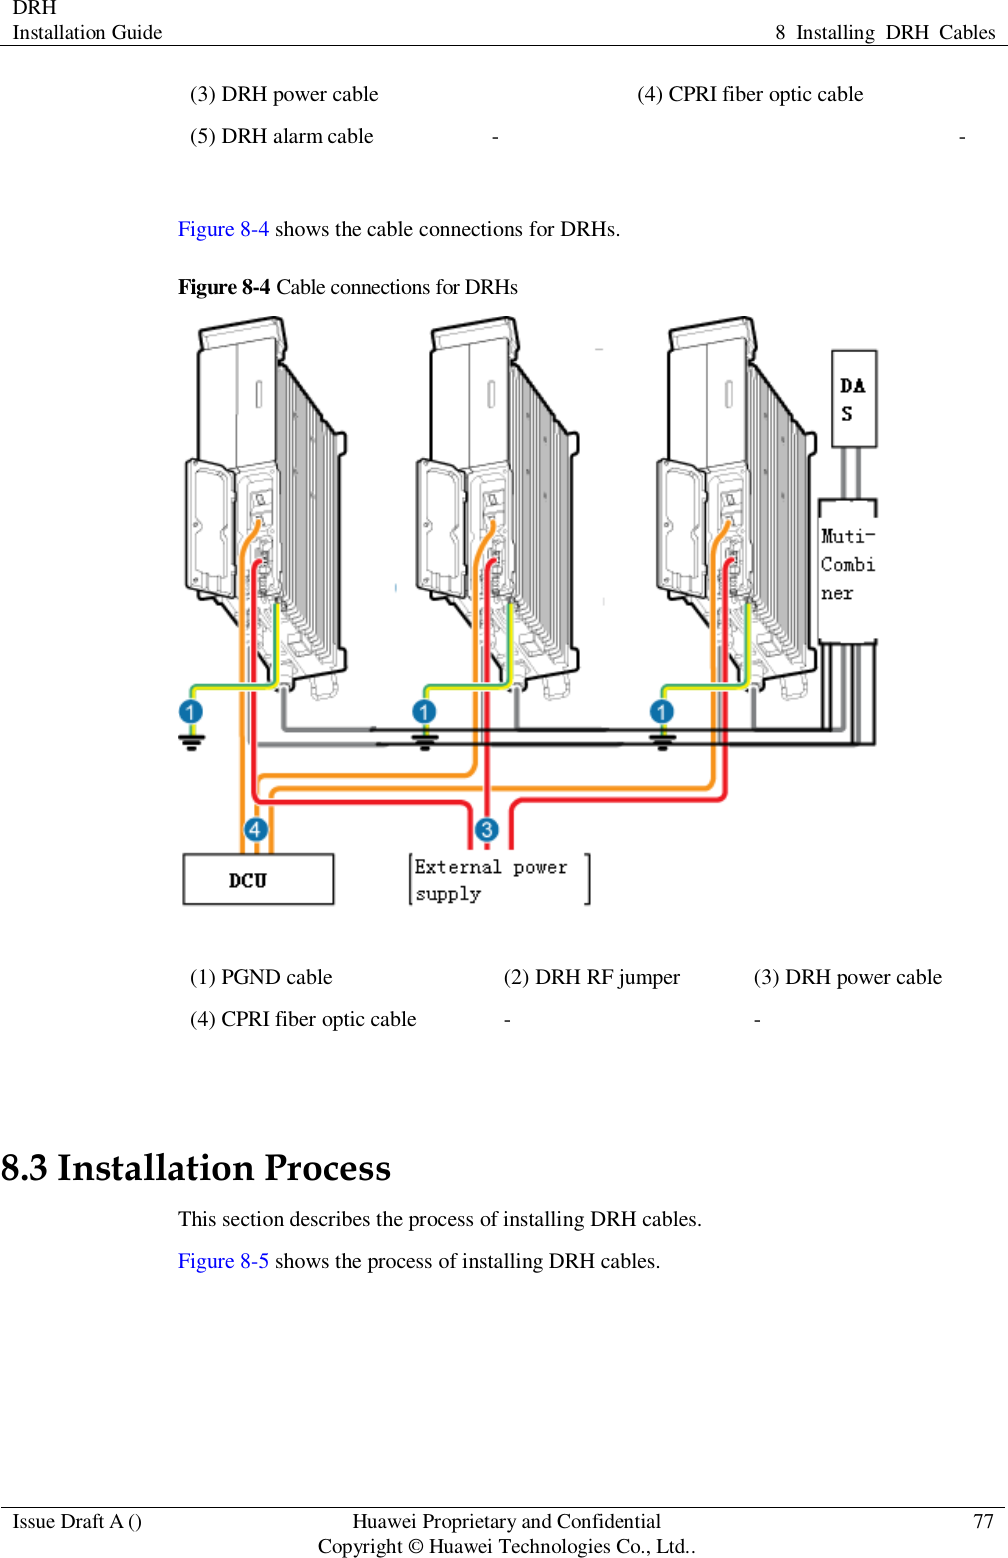 DRH   Installation Guide 8  Installing  DRH  Cables  Issue Draft A () Huawei Proprietary and Confidential                                     Copyright © Huawei Technologies Co., Ltd.. 77  (3) DRH power cable (4) CPRI fiber optic cable (5) DRH alarm cable - -  Figure 8-4 shows the cable connections for DRHs. Figure 8-4 Cable connections for DRHs  (1) PGND cable (2) DRH RF jumper (3) DRH power cable (4) CPRI fiber optic cable - -  8.3 Installation Process This section describes the process of installing DRH cables. Figure 8-5 shows the process of installing DRH cables. 